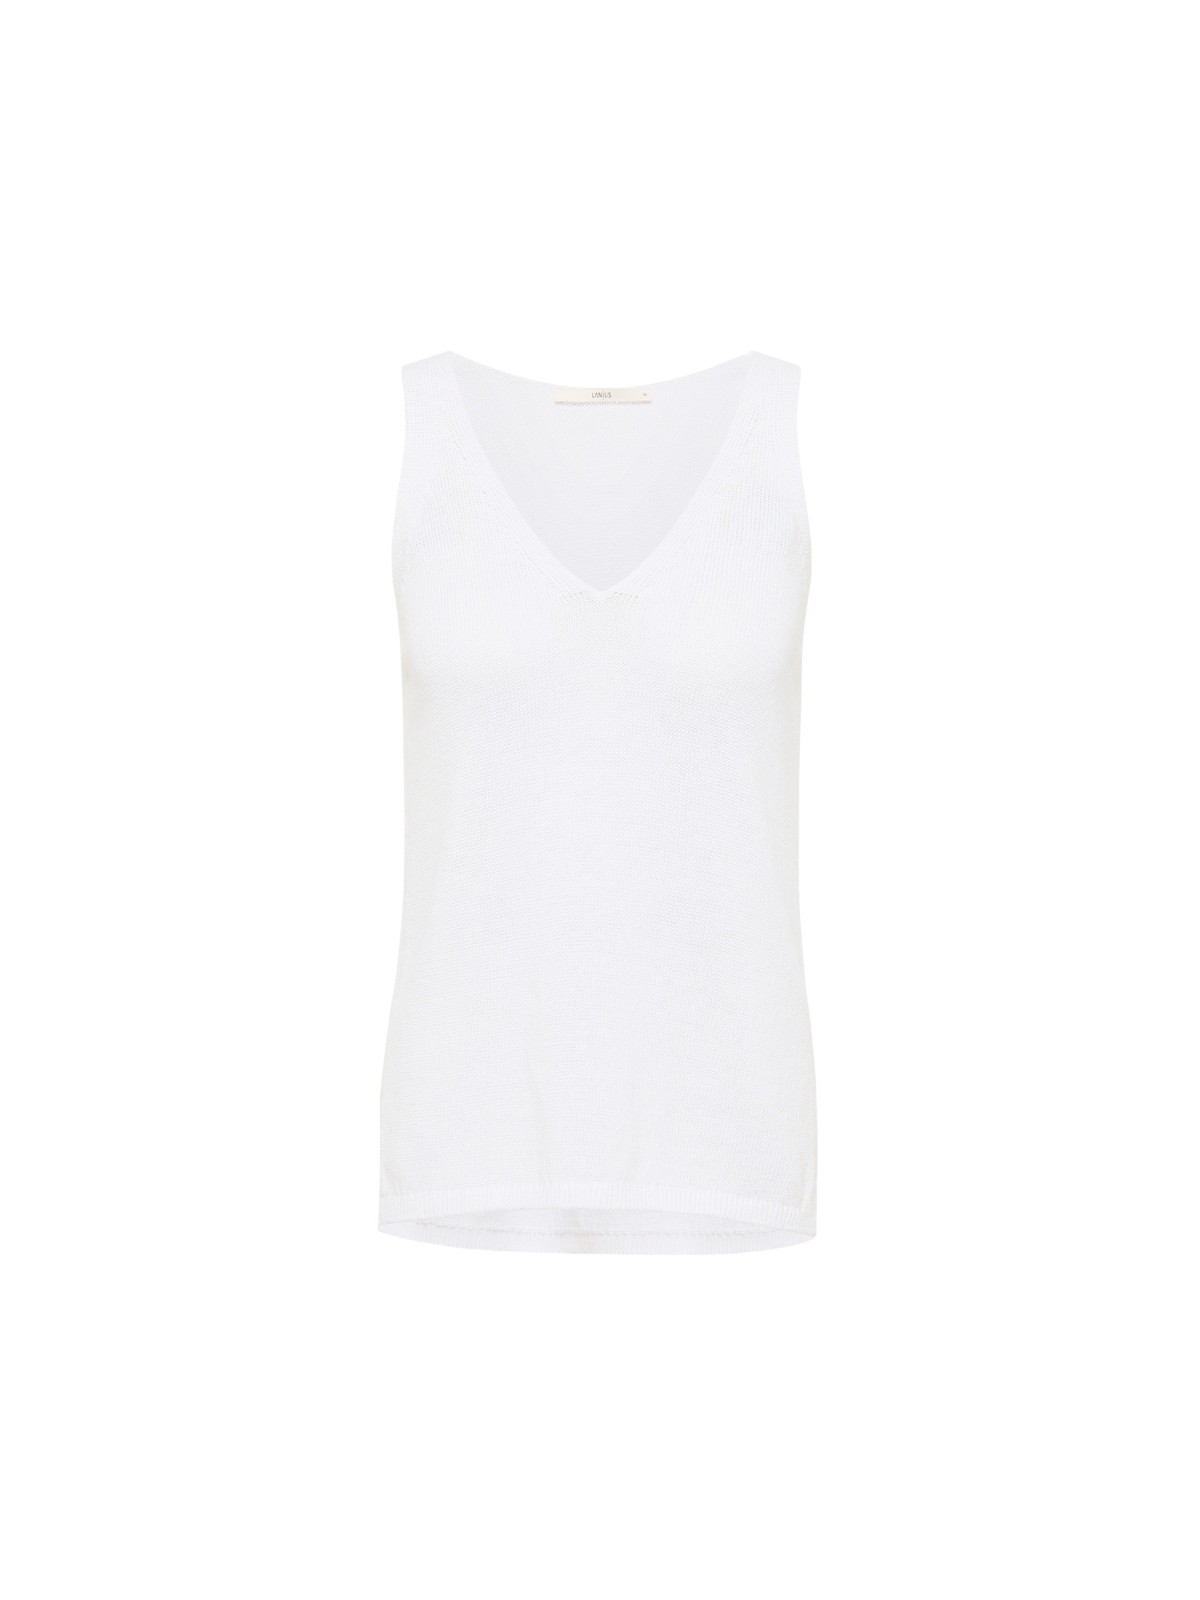 Knitted top made from organic cotton & linen - white